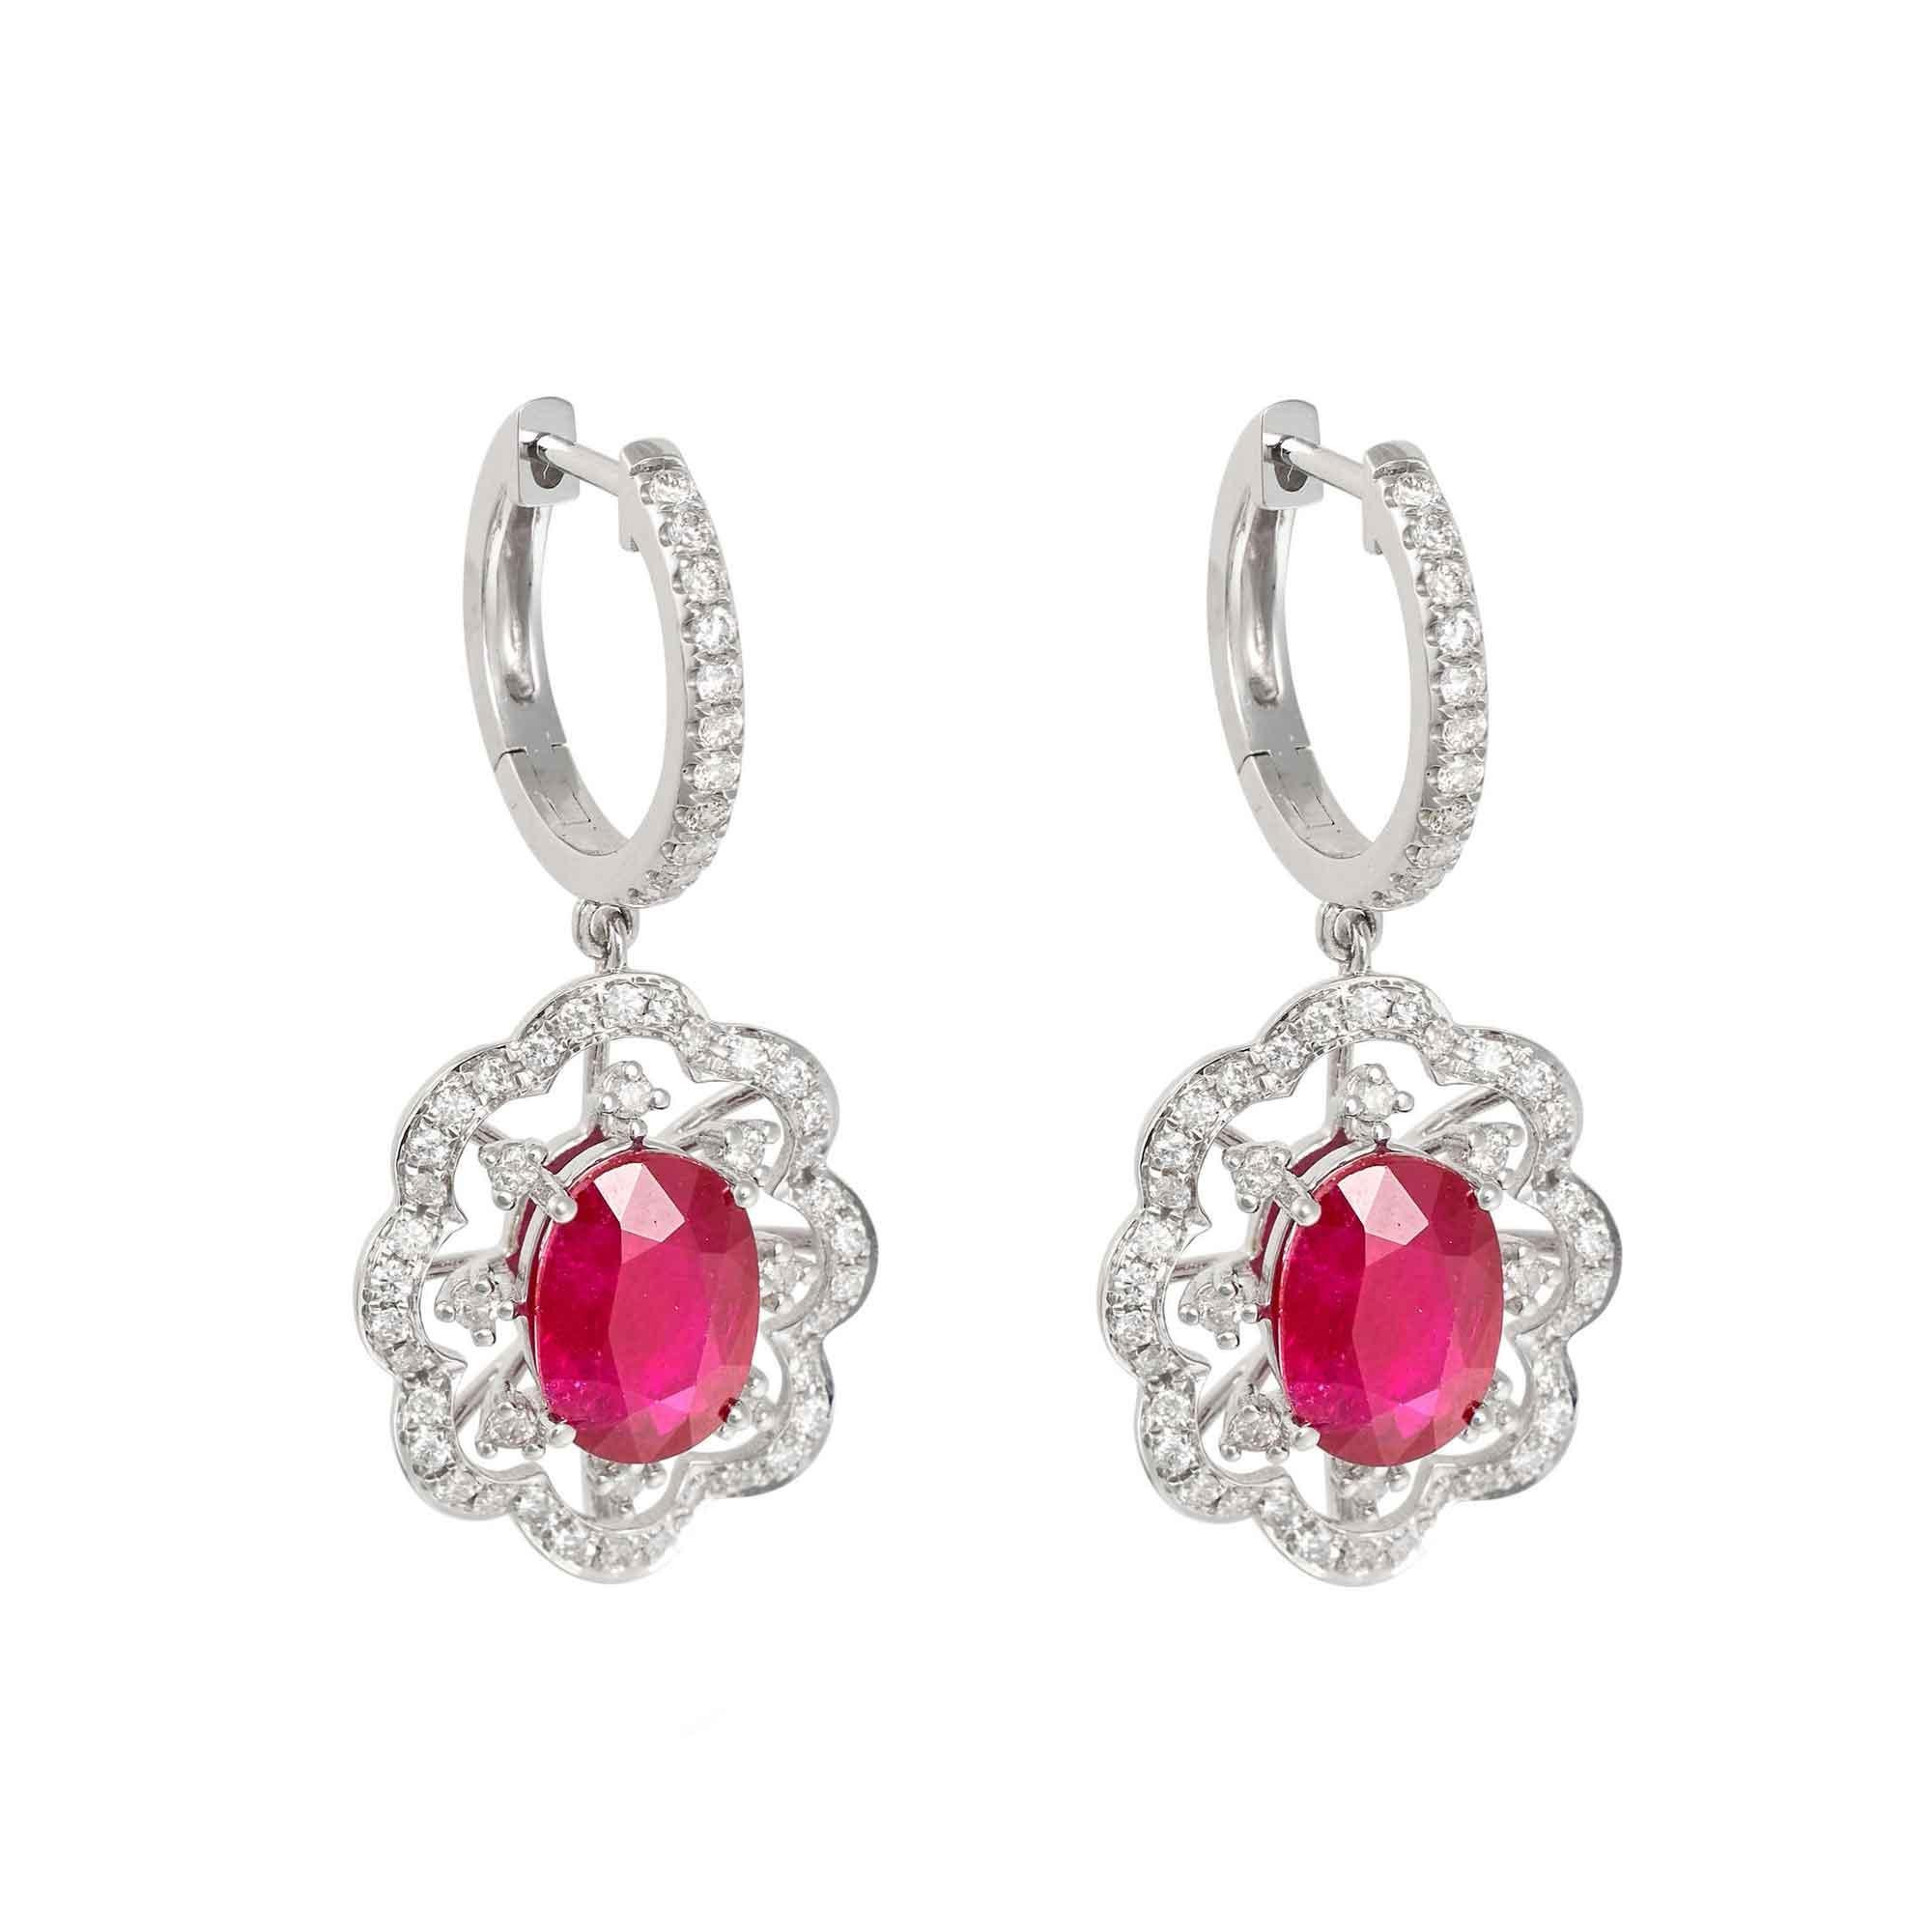 A pair of contemporary halo ruby drop earrings ring. Each featuring a central oval cut ruby, beautifully framed with a floral halo set with diamonds in 18ct white gold.

- Rubies 3.06ct
- Diamonds 0.557ct
- Dimensions (LxW): 30mm x 14mm
- Weight per